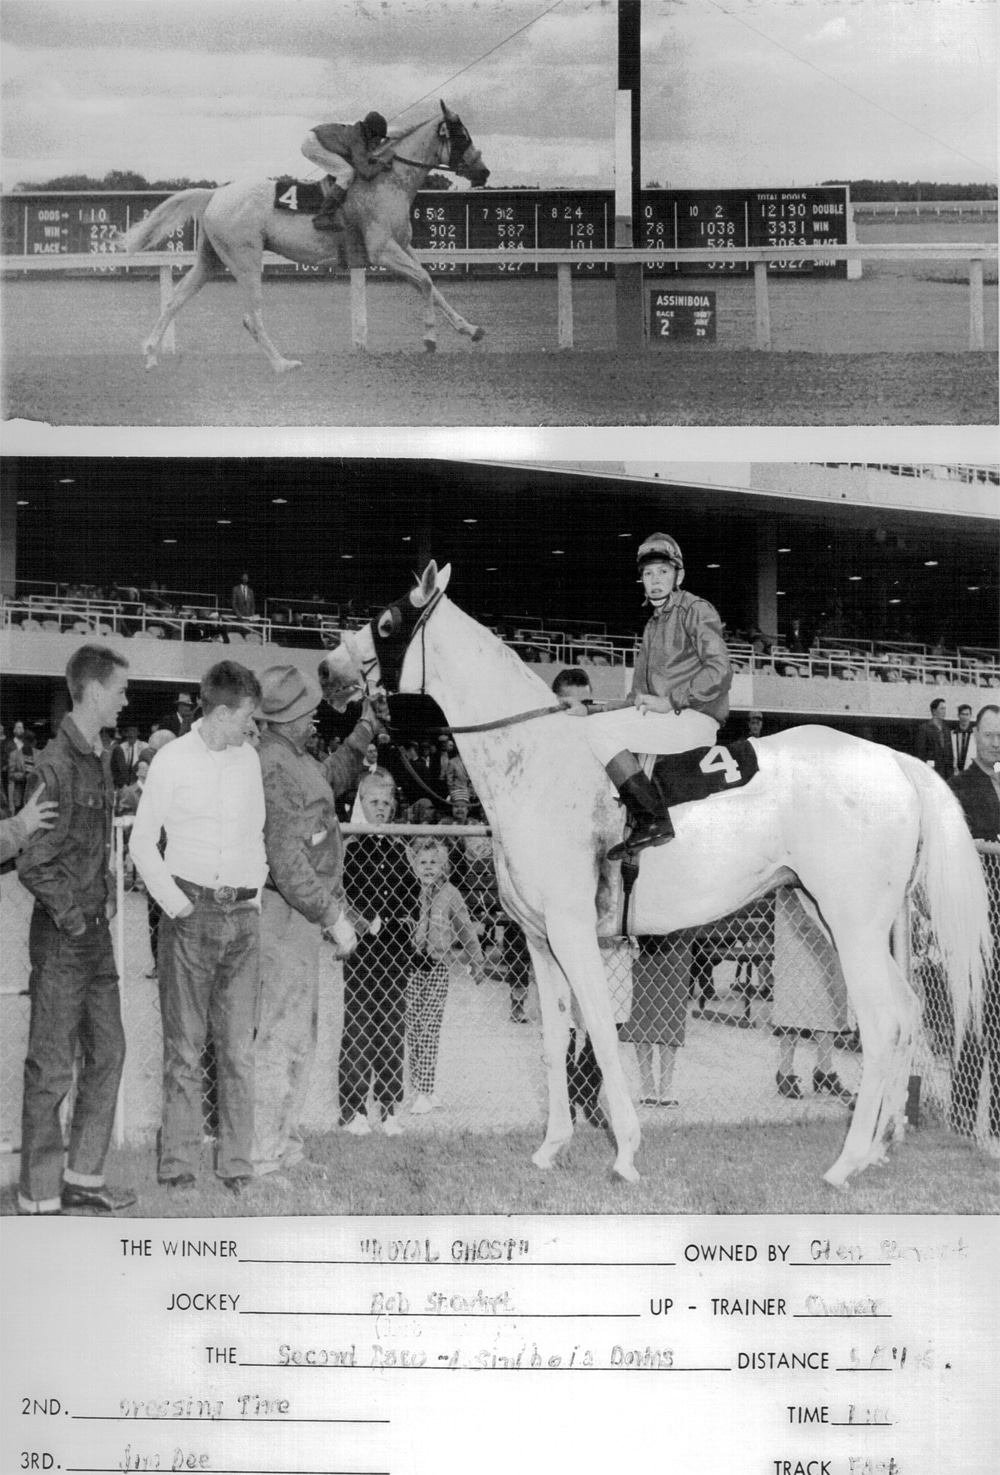 Royal Ghost. Three wins as a 10-year-old at the Downs in 1960. Double-digit payoffs every time. Bobby Stewart up.